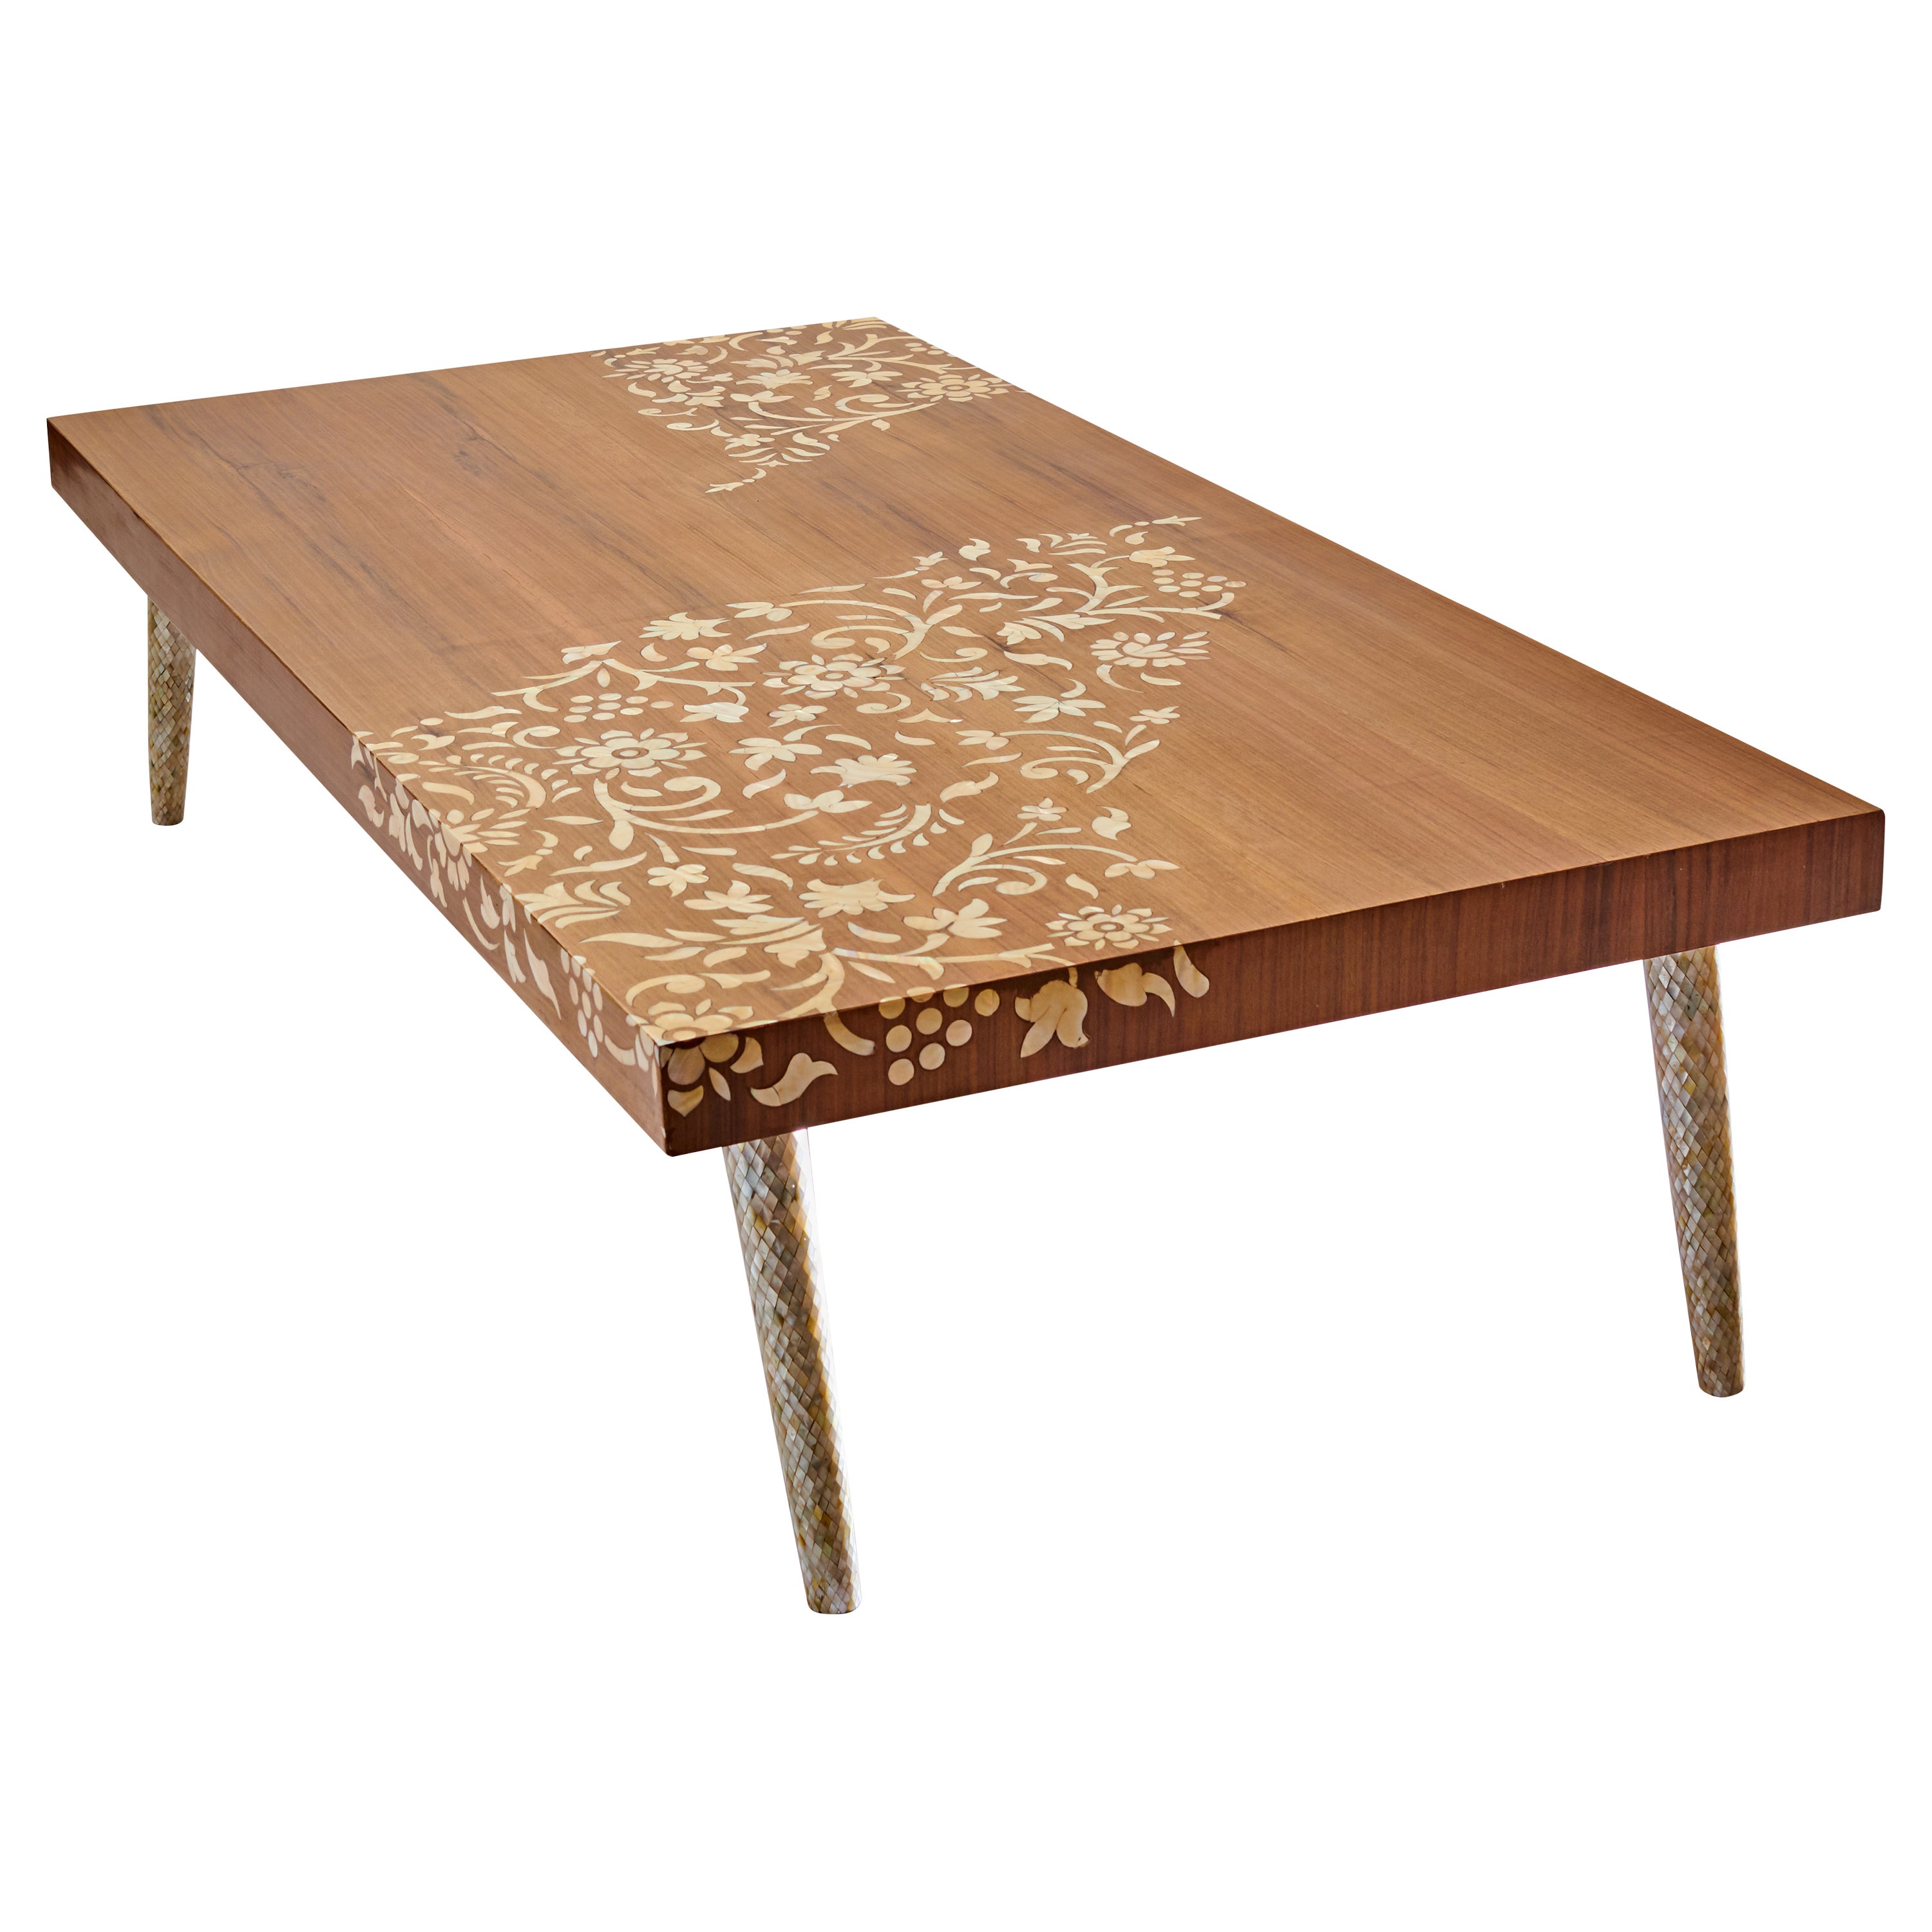 Walnut Coffee Table with Handcrafted Mother-of-Pearl Flower Inlay and Legs